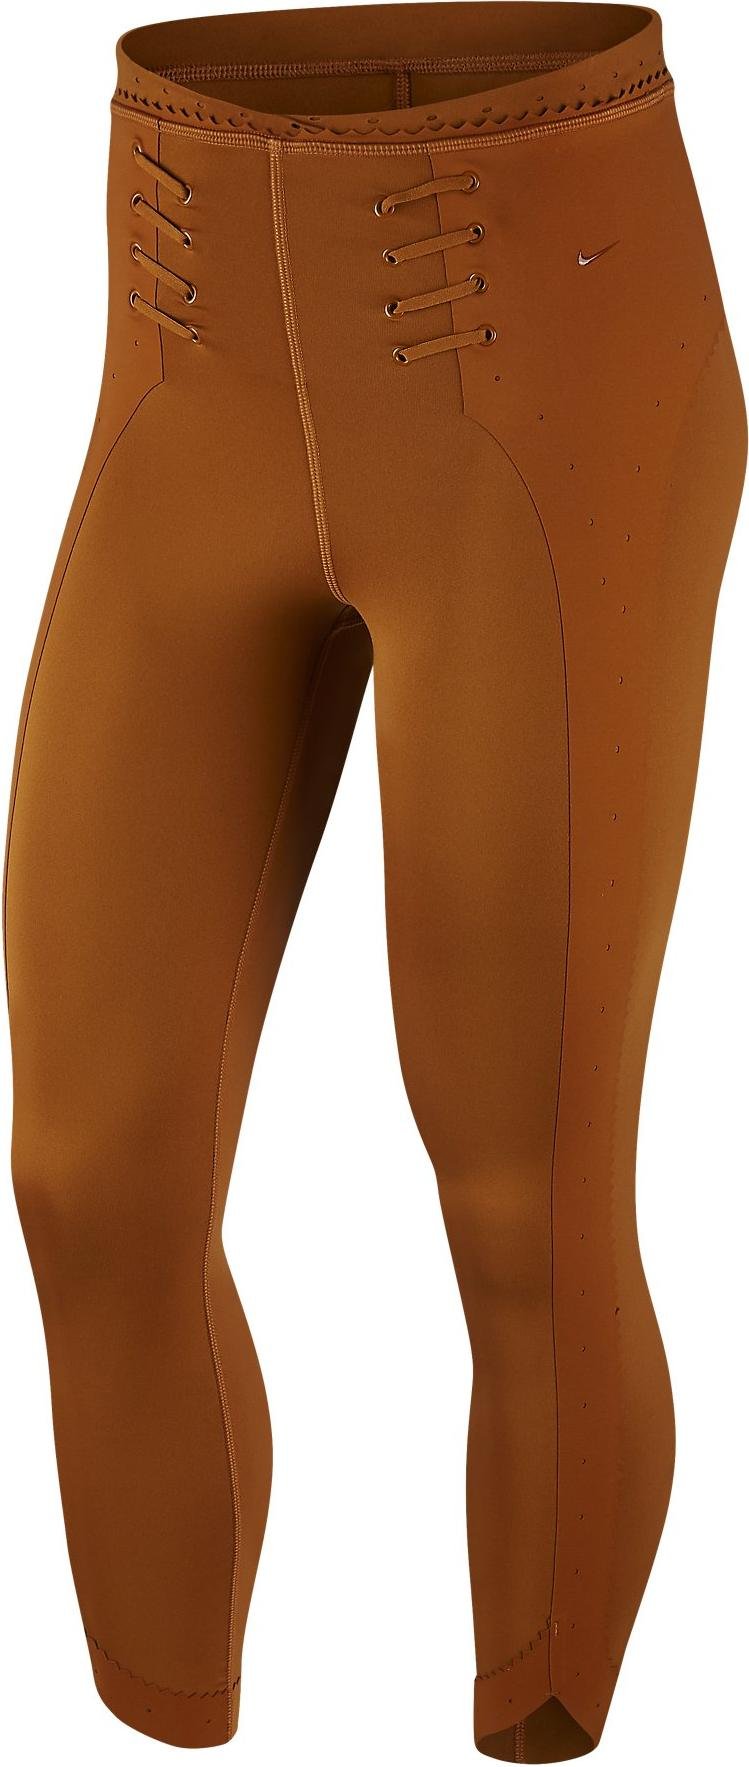 Leggings Nike W NK BOUTIQUE TIGHT TOOLING